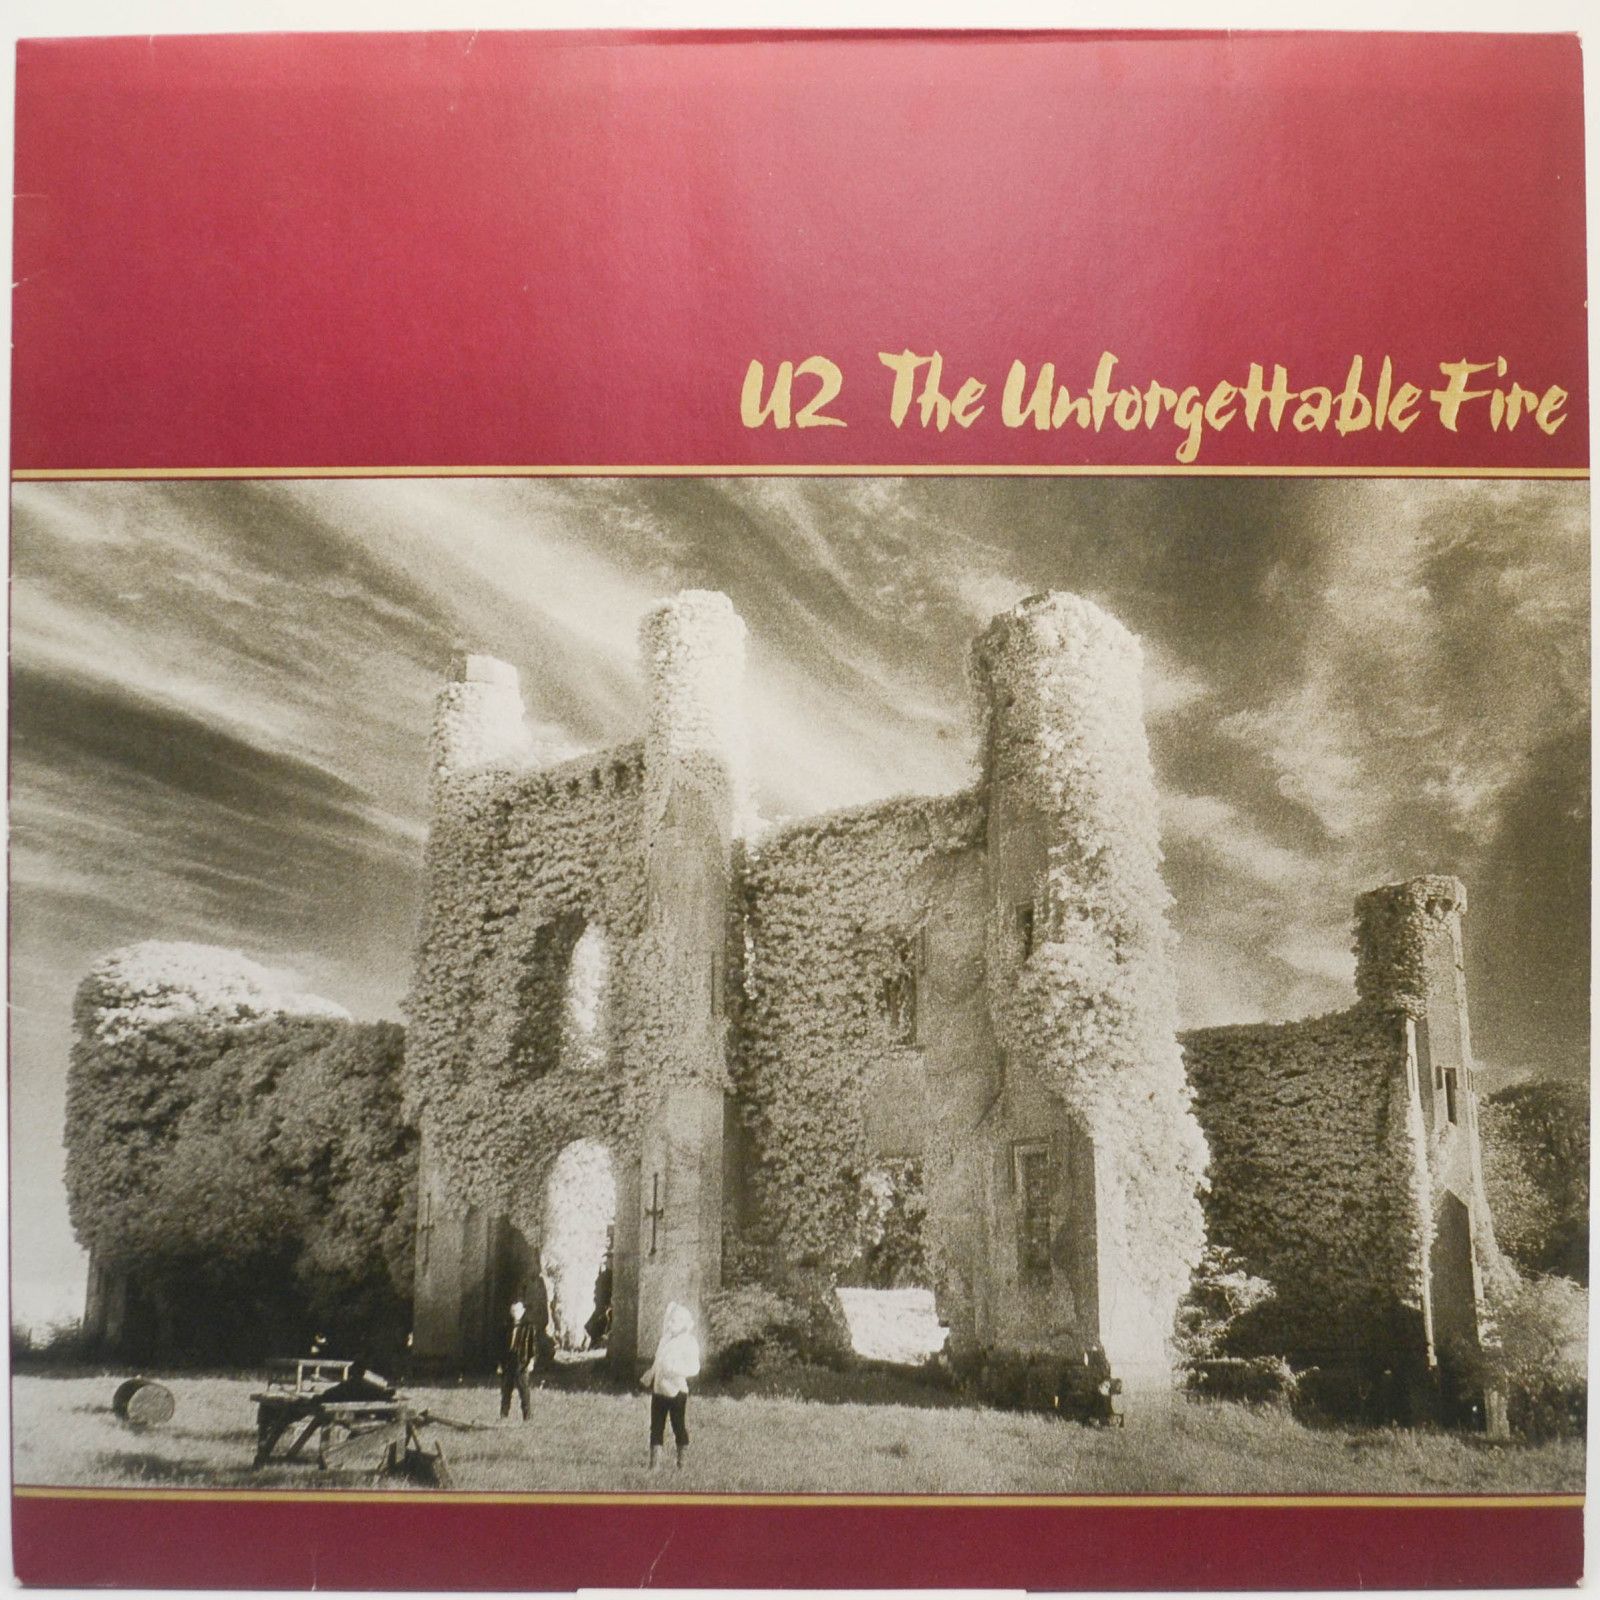 U2 — The Unforgettable Fire, 1984